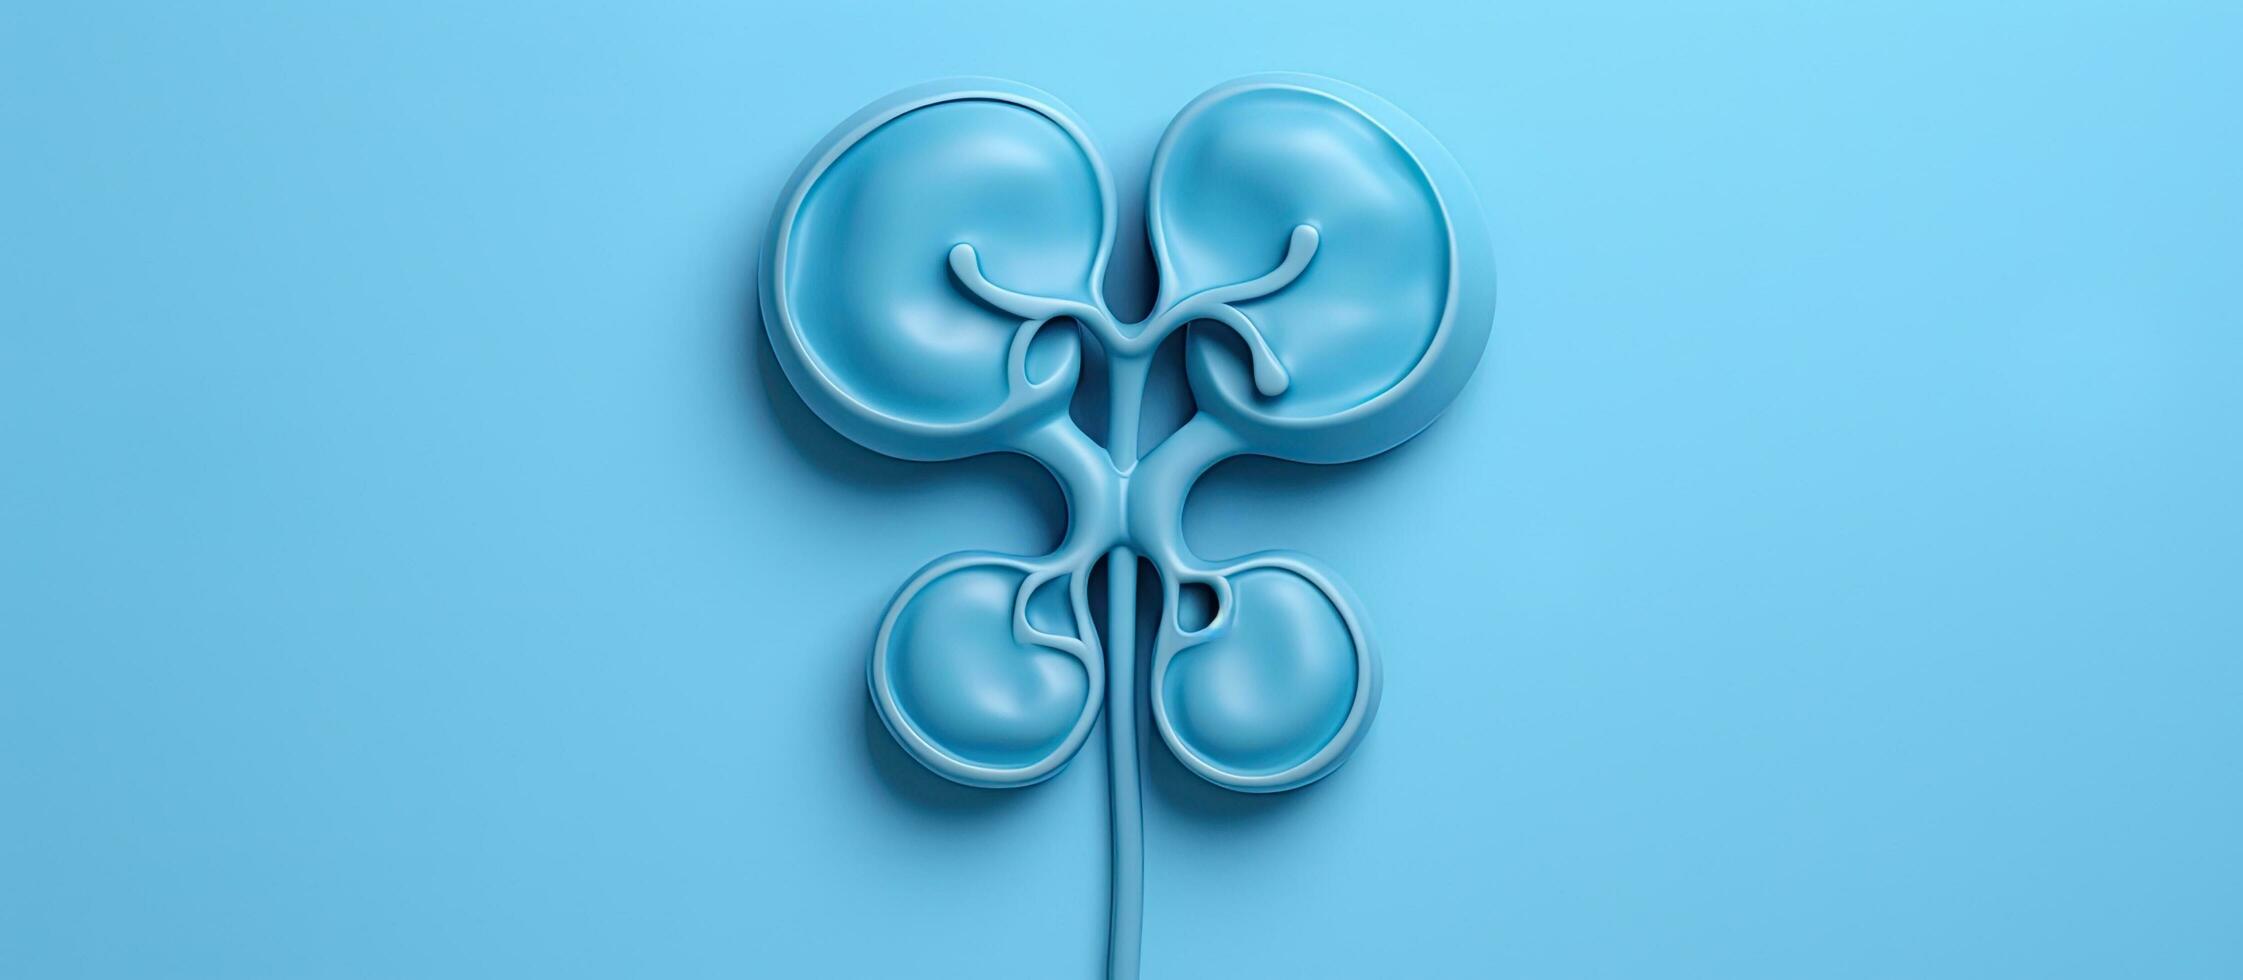 A decorative model of human kidneys is placed on a pastel blue background. The concept represents photo